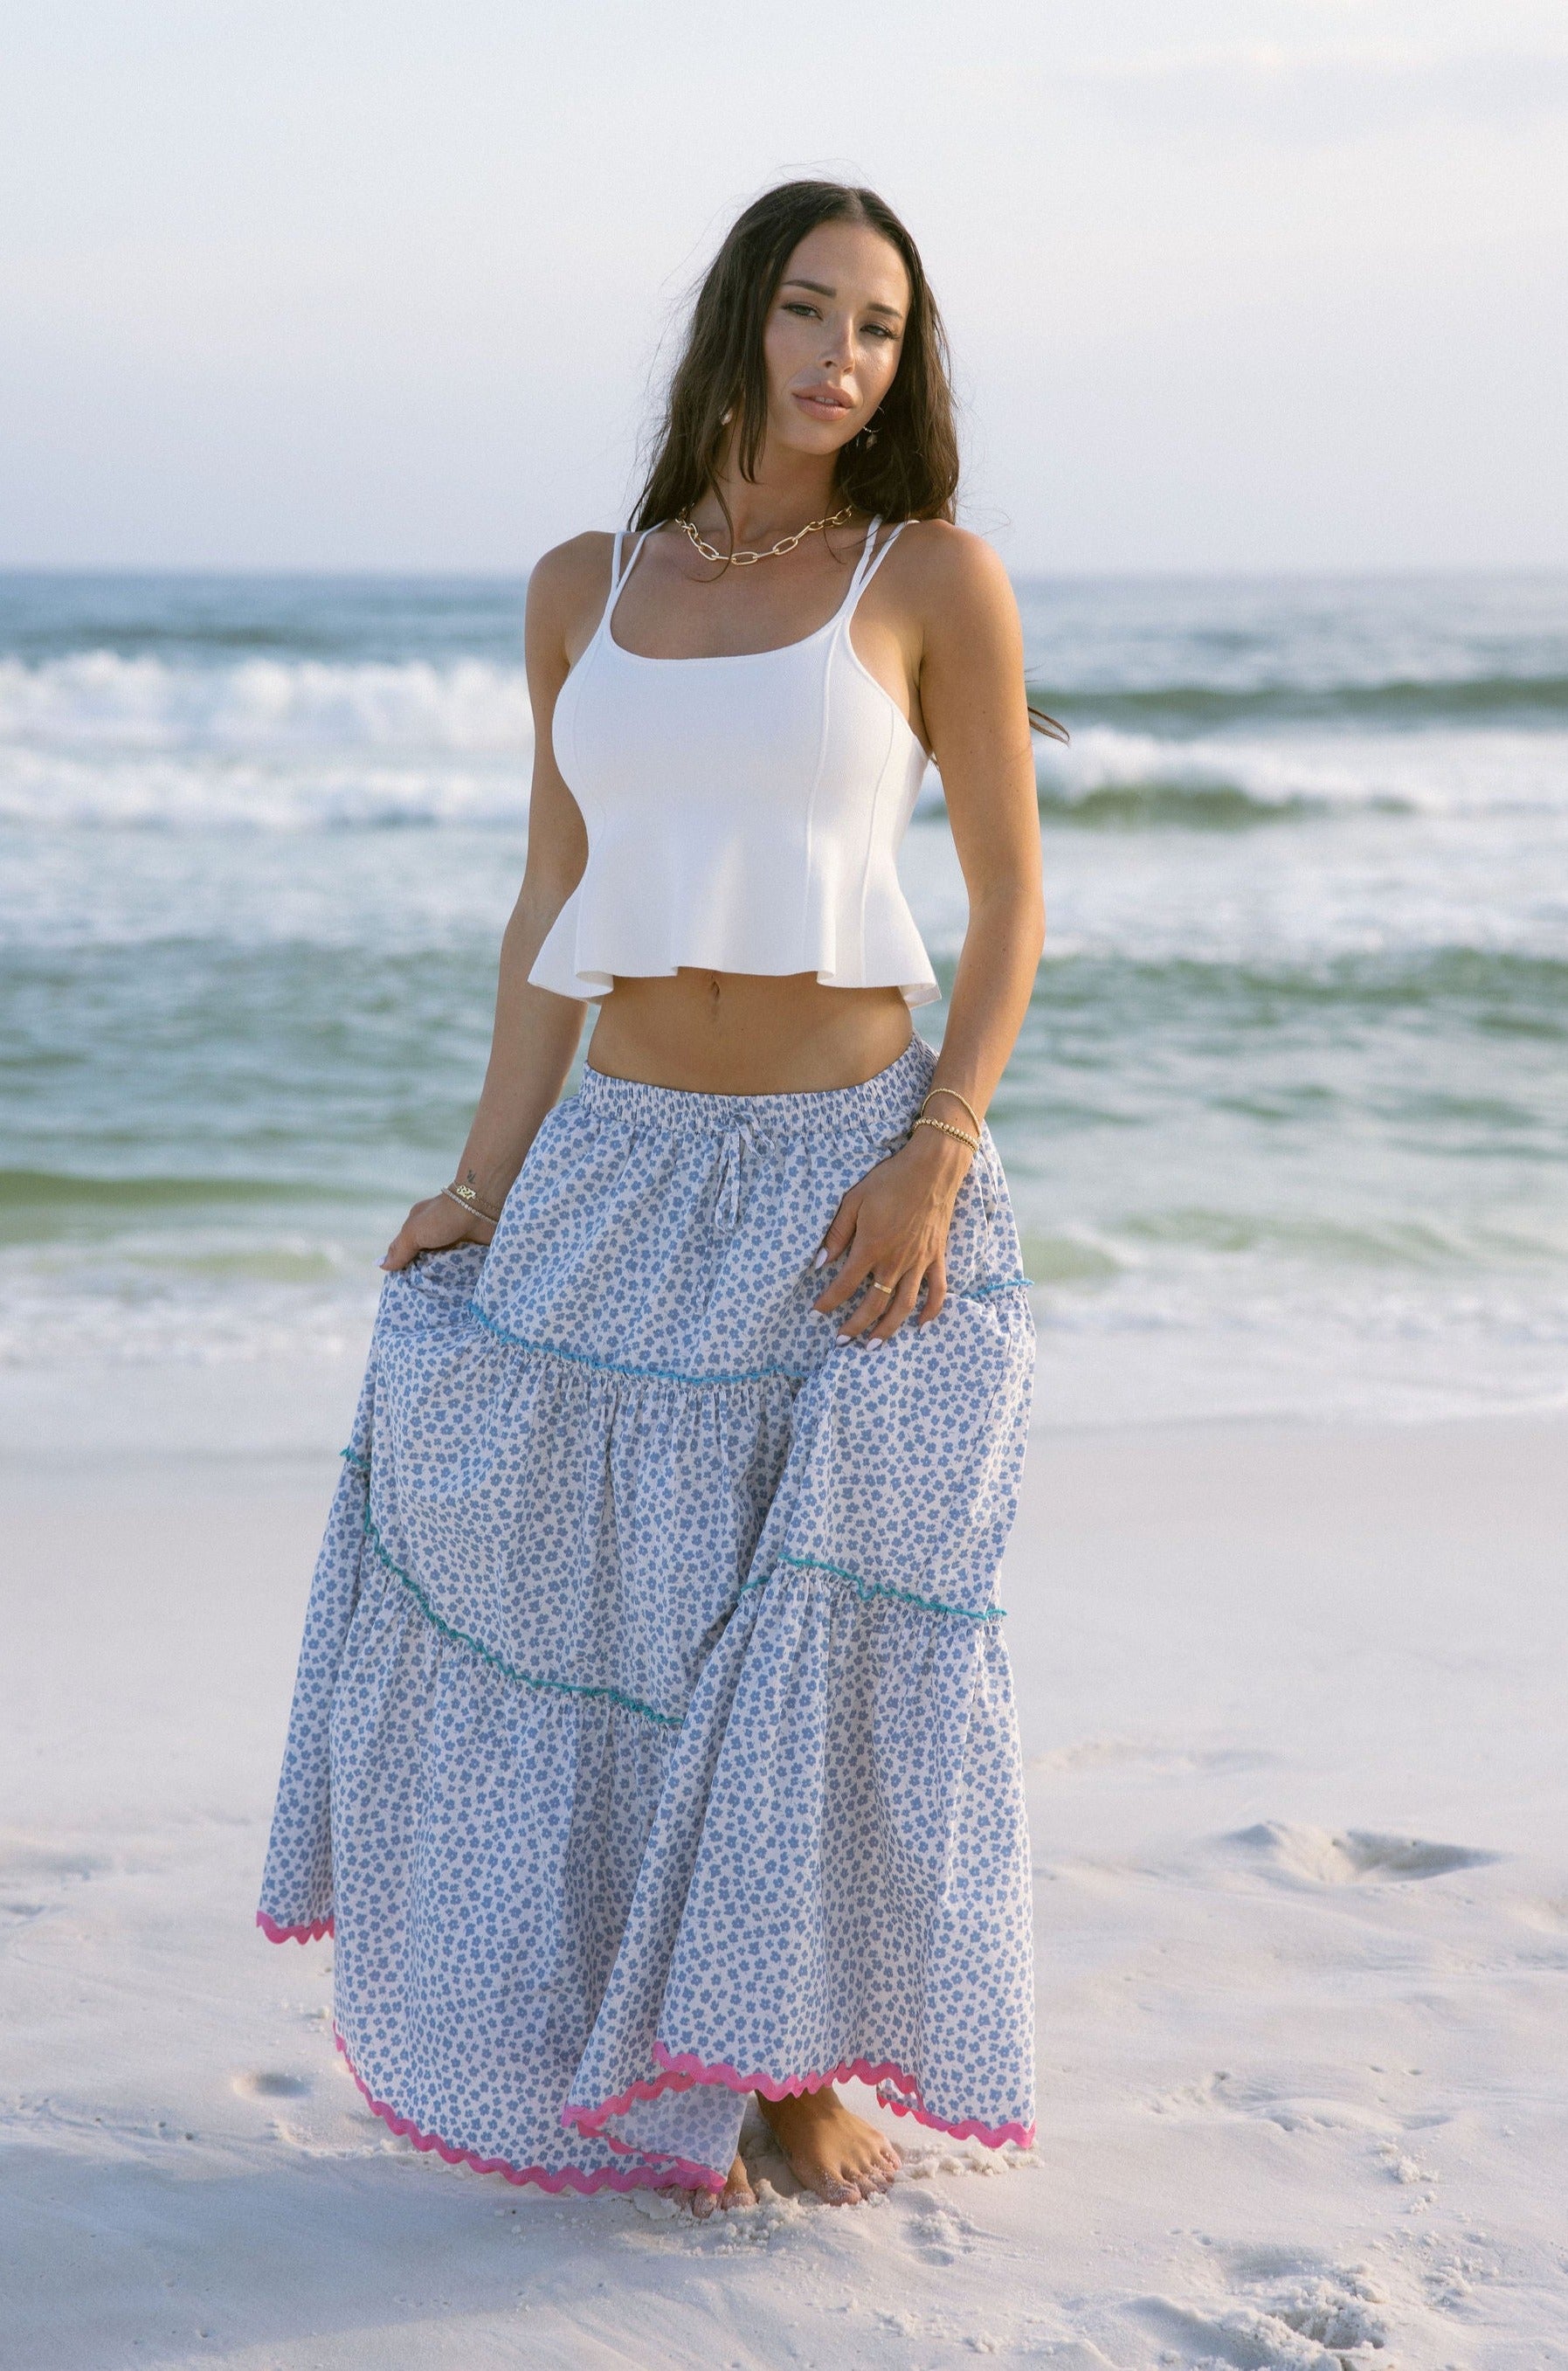 Full body front view of female model wearing the Marisol Tiered Floral Maxi Skirt in Blue, that has blue and white floral fabric, colorful tiered ruffle trim, and an elastic waist. Worn with white tank top.